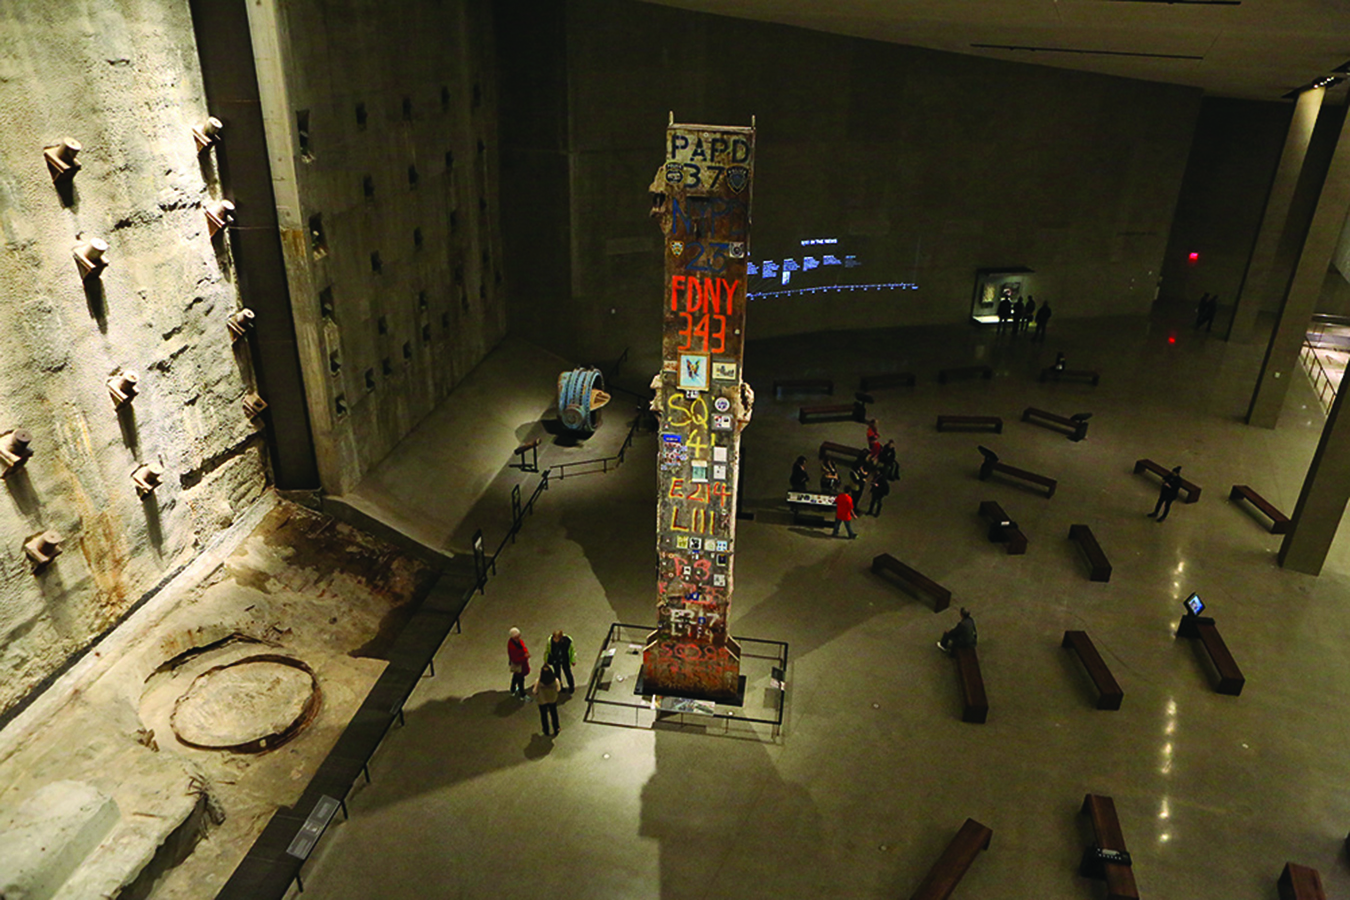 1. The 36-foot-tall Last Column was a symbol of resilience to the thousands of recovery workers who spent months excavating the World Trade Center site after 9/11. Part of the core structure of the South Tower, the 58-ton beam was covered with words and numbers, pictures, and tributes by workers during the recovery effort. Photo: Robert Adam Mayer.